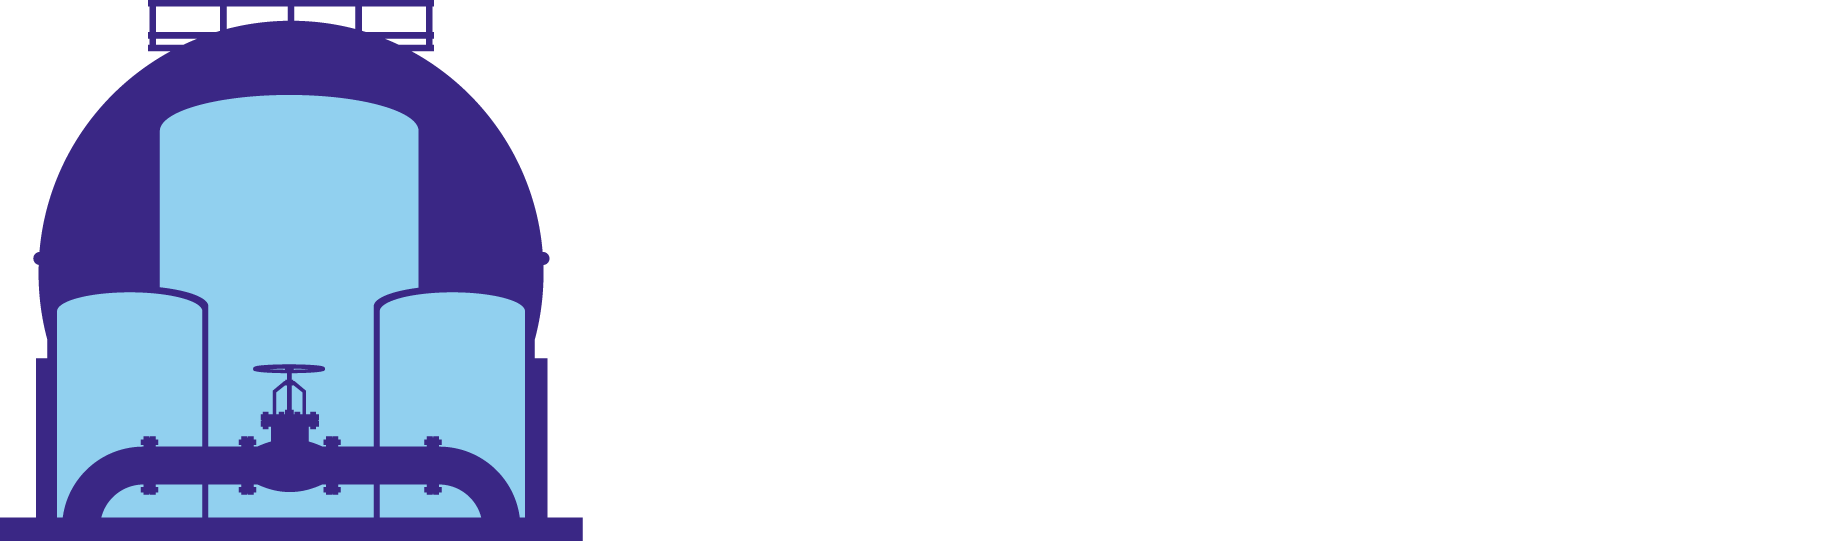 energy infrastructure and technology logo